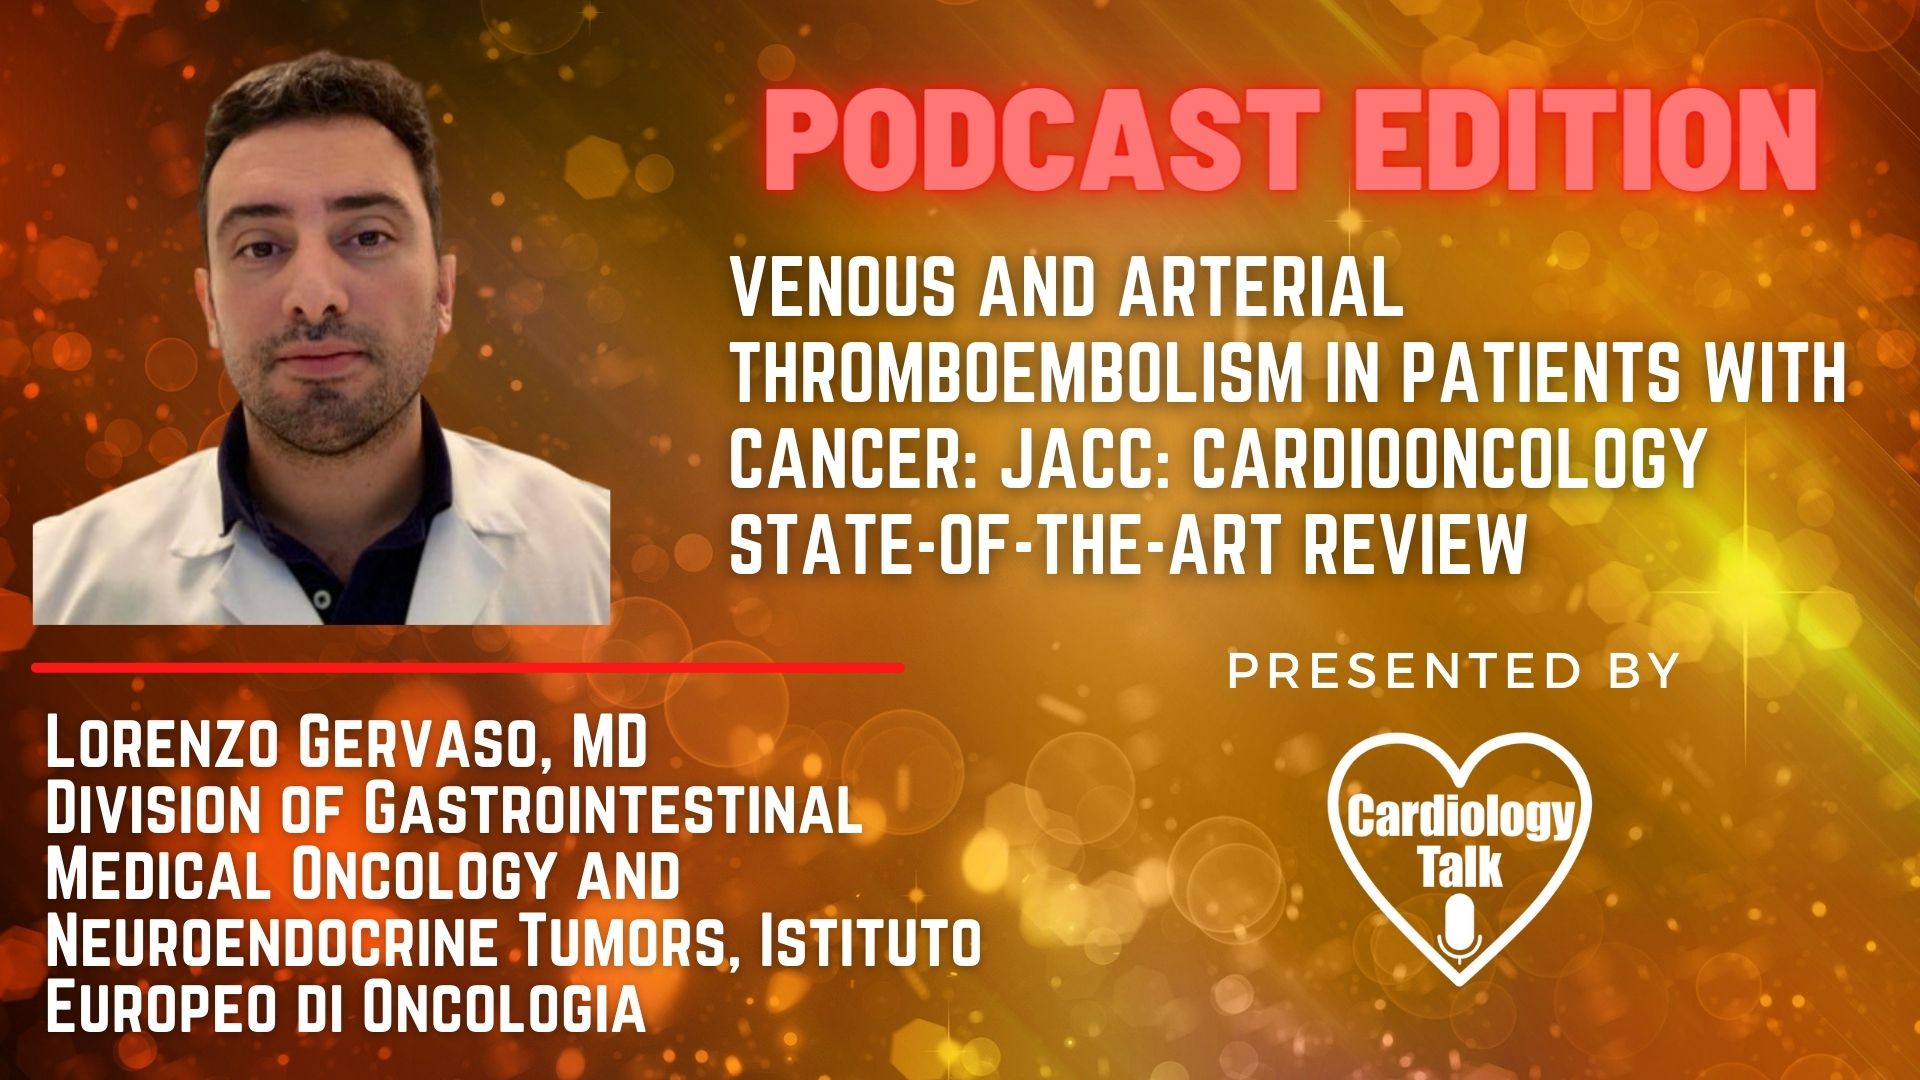 Podcast- Dr. Lorenzo Gervaso- Venous and Arterial Thromboembolism in Patients With Cancer: JACC: CardioOncology State-of-the-Art Review @GervasoLorenzo #CardioOncology #Cardiology #Resear...